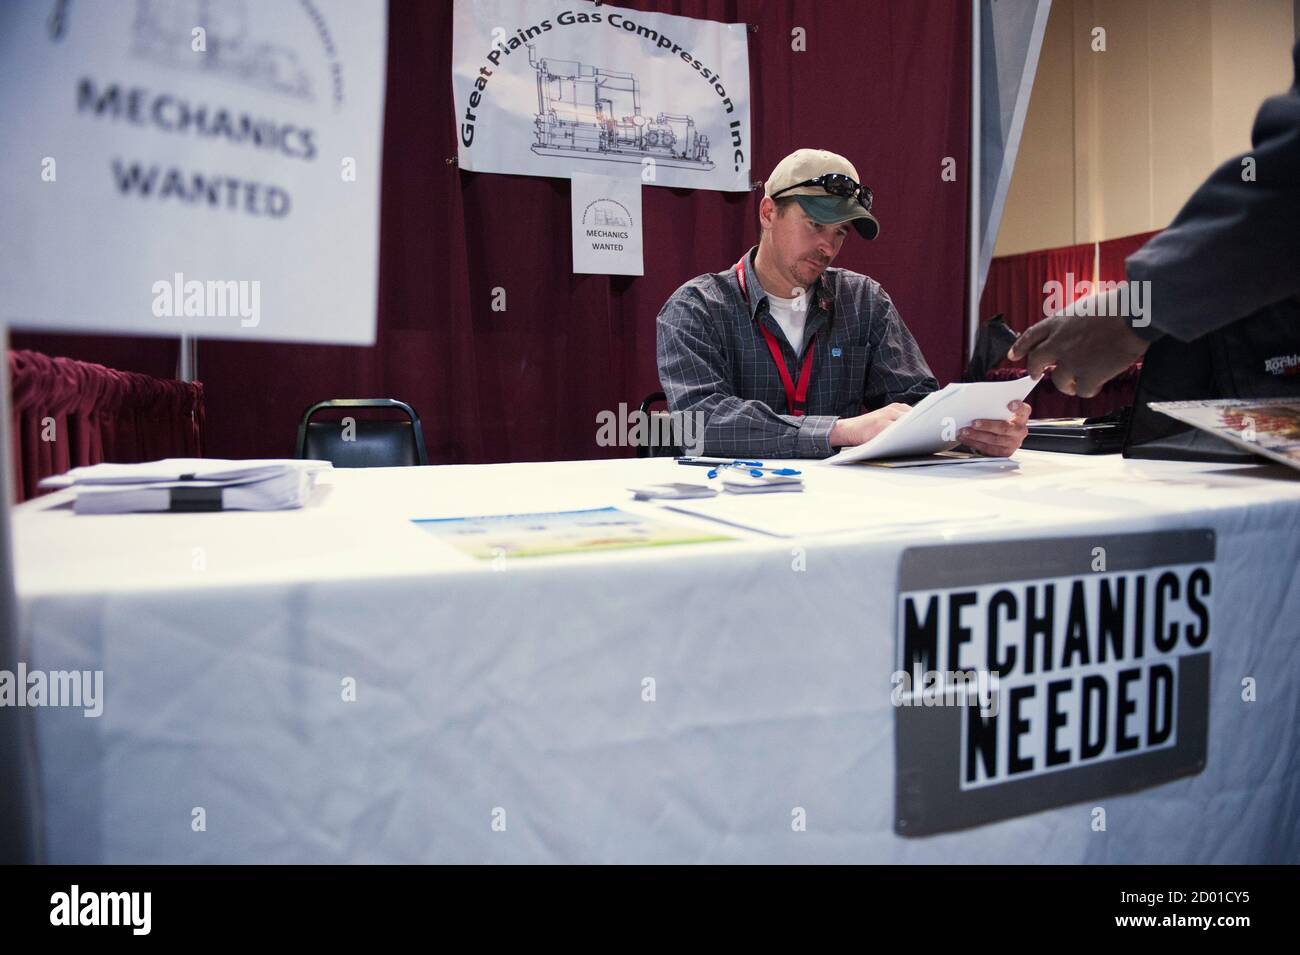 Tom Tow, a field foreman for Great Plains Gas Compression, looks at an application at a job fair in Williston, North Dakota March 11, 2015. REUTERS/Andrew Cullen    (UNITED STATES - Tags: BUSINESS EMPLOYMENT) Stock Photo